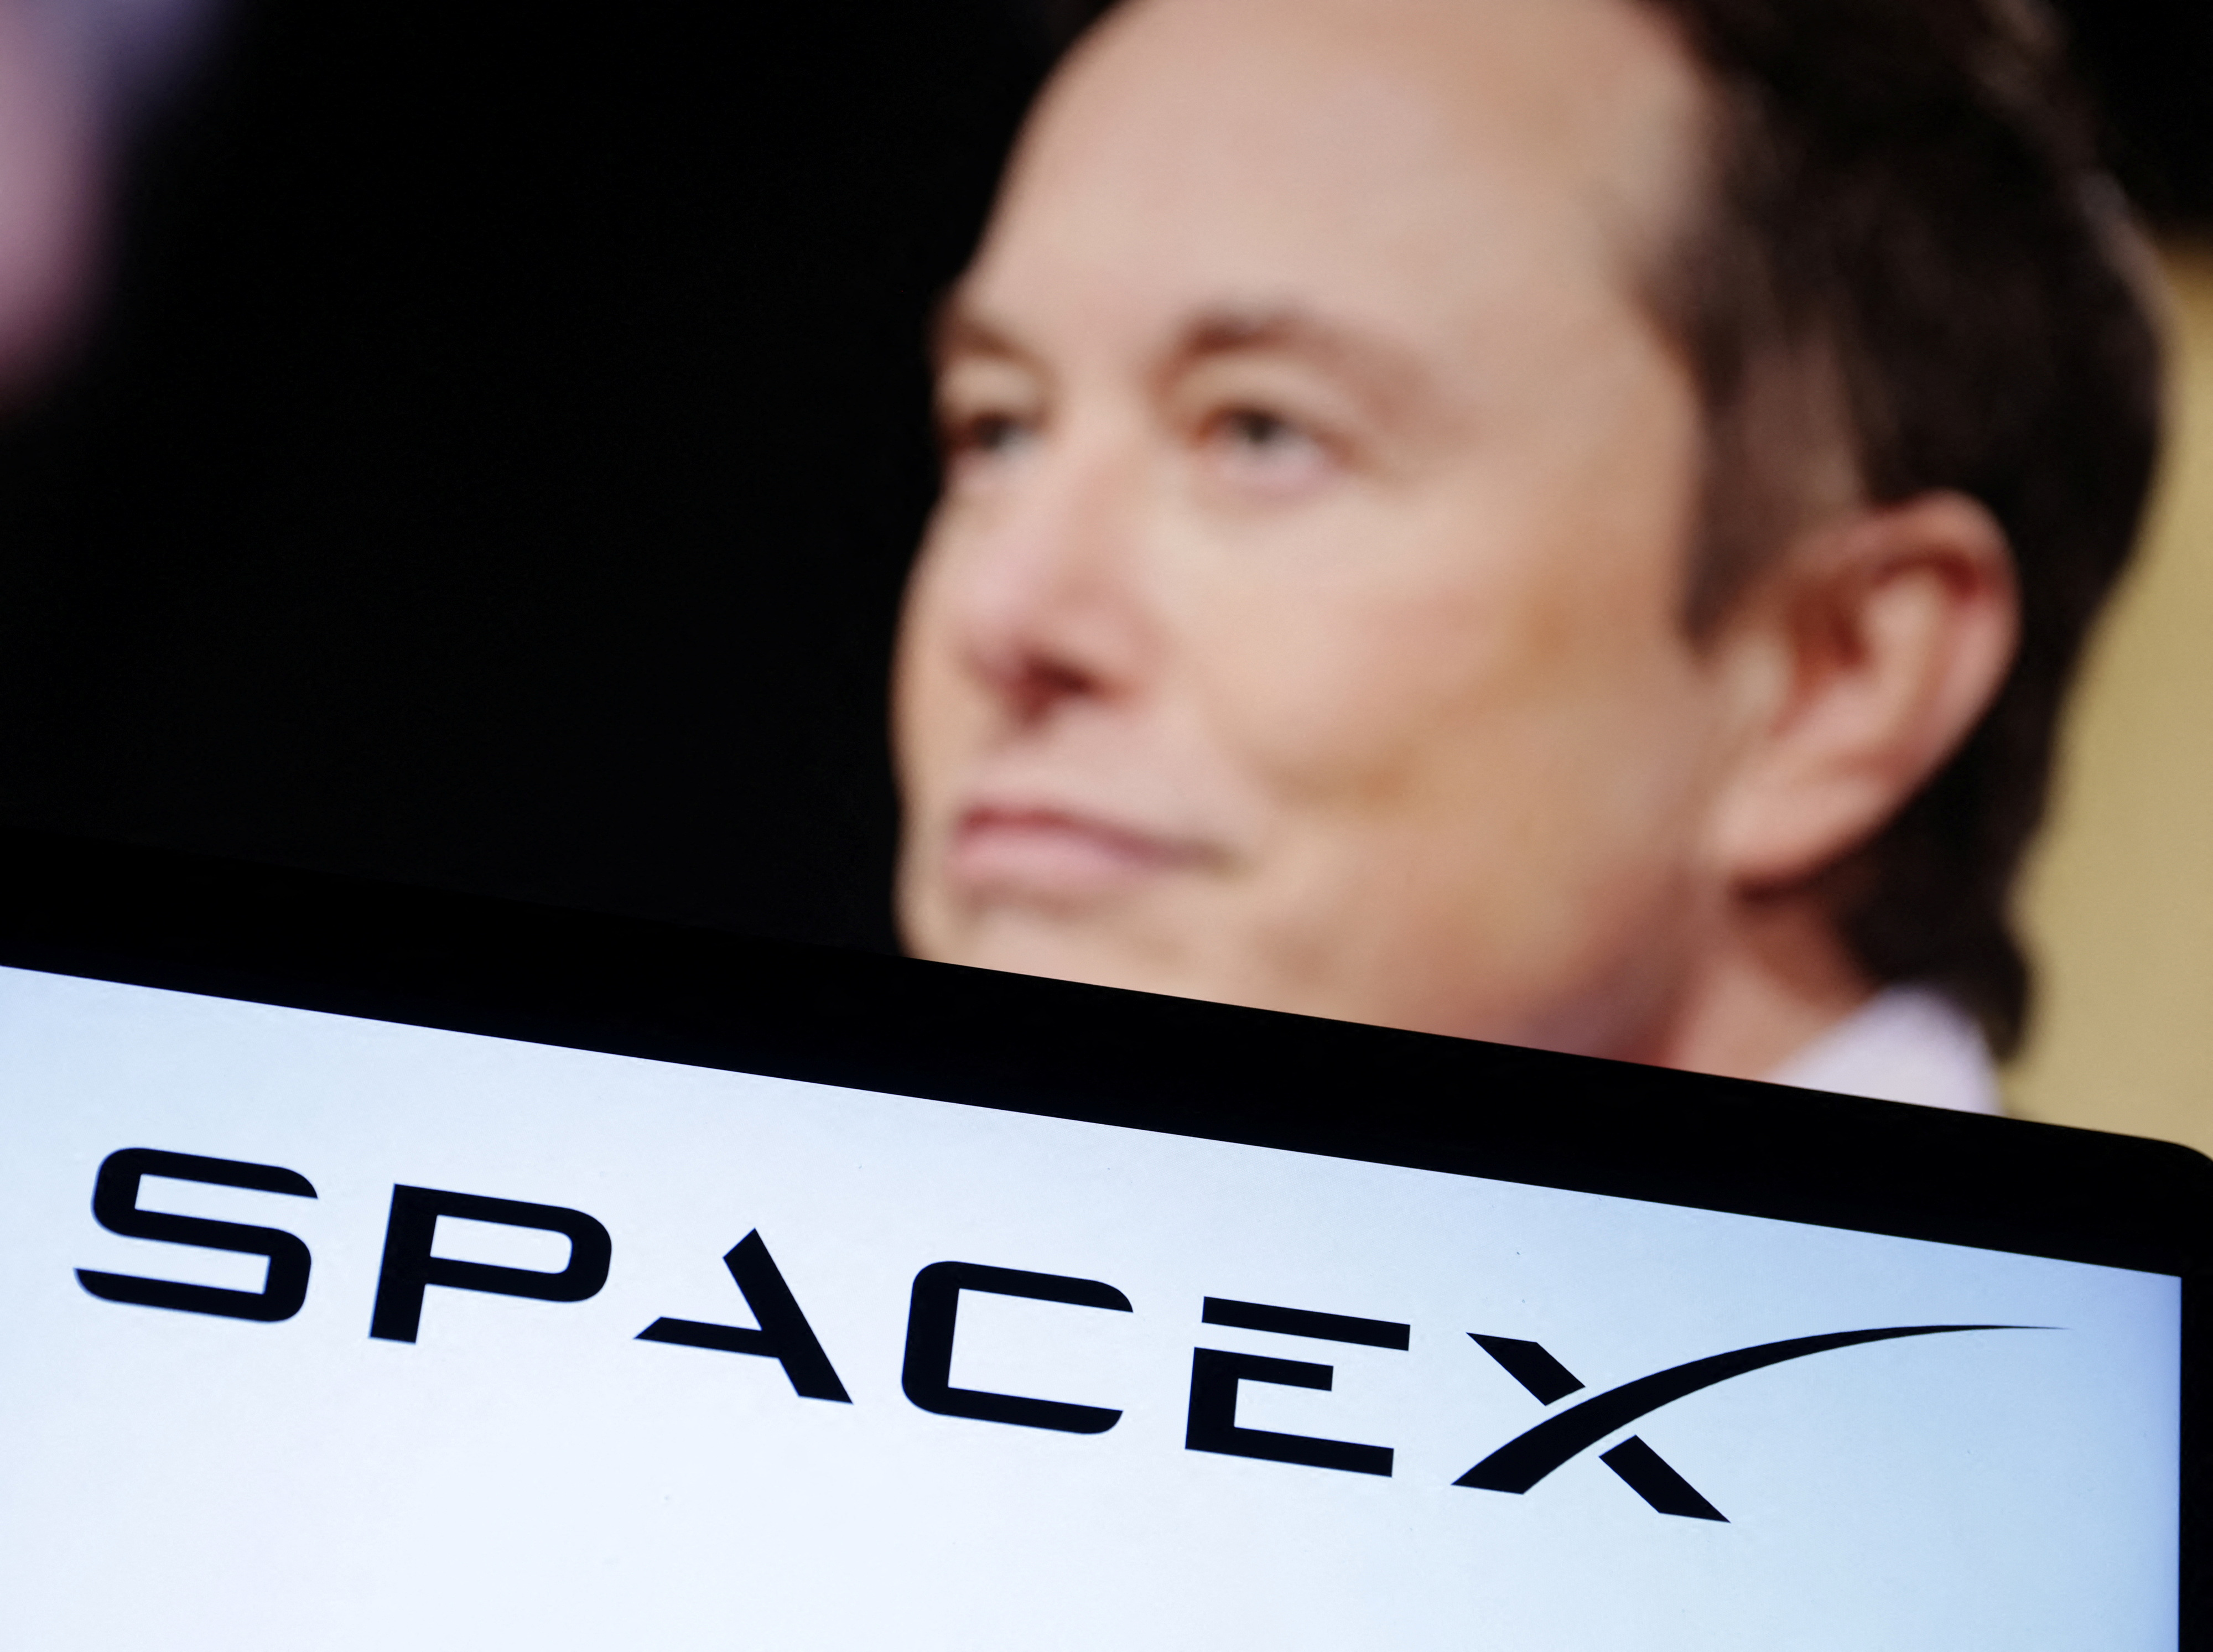 Illustration shows SpaceX logo and Elon Musk photo  SpaceX to raise $750 million at $137 billion valuation &#8211; CNBC FXOKSSGCOJLOXJ6LDLAR6UL6T4